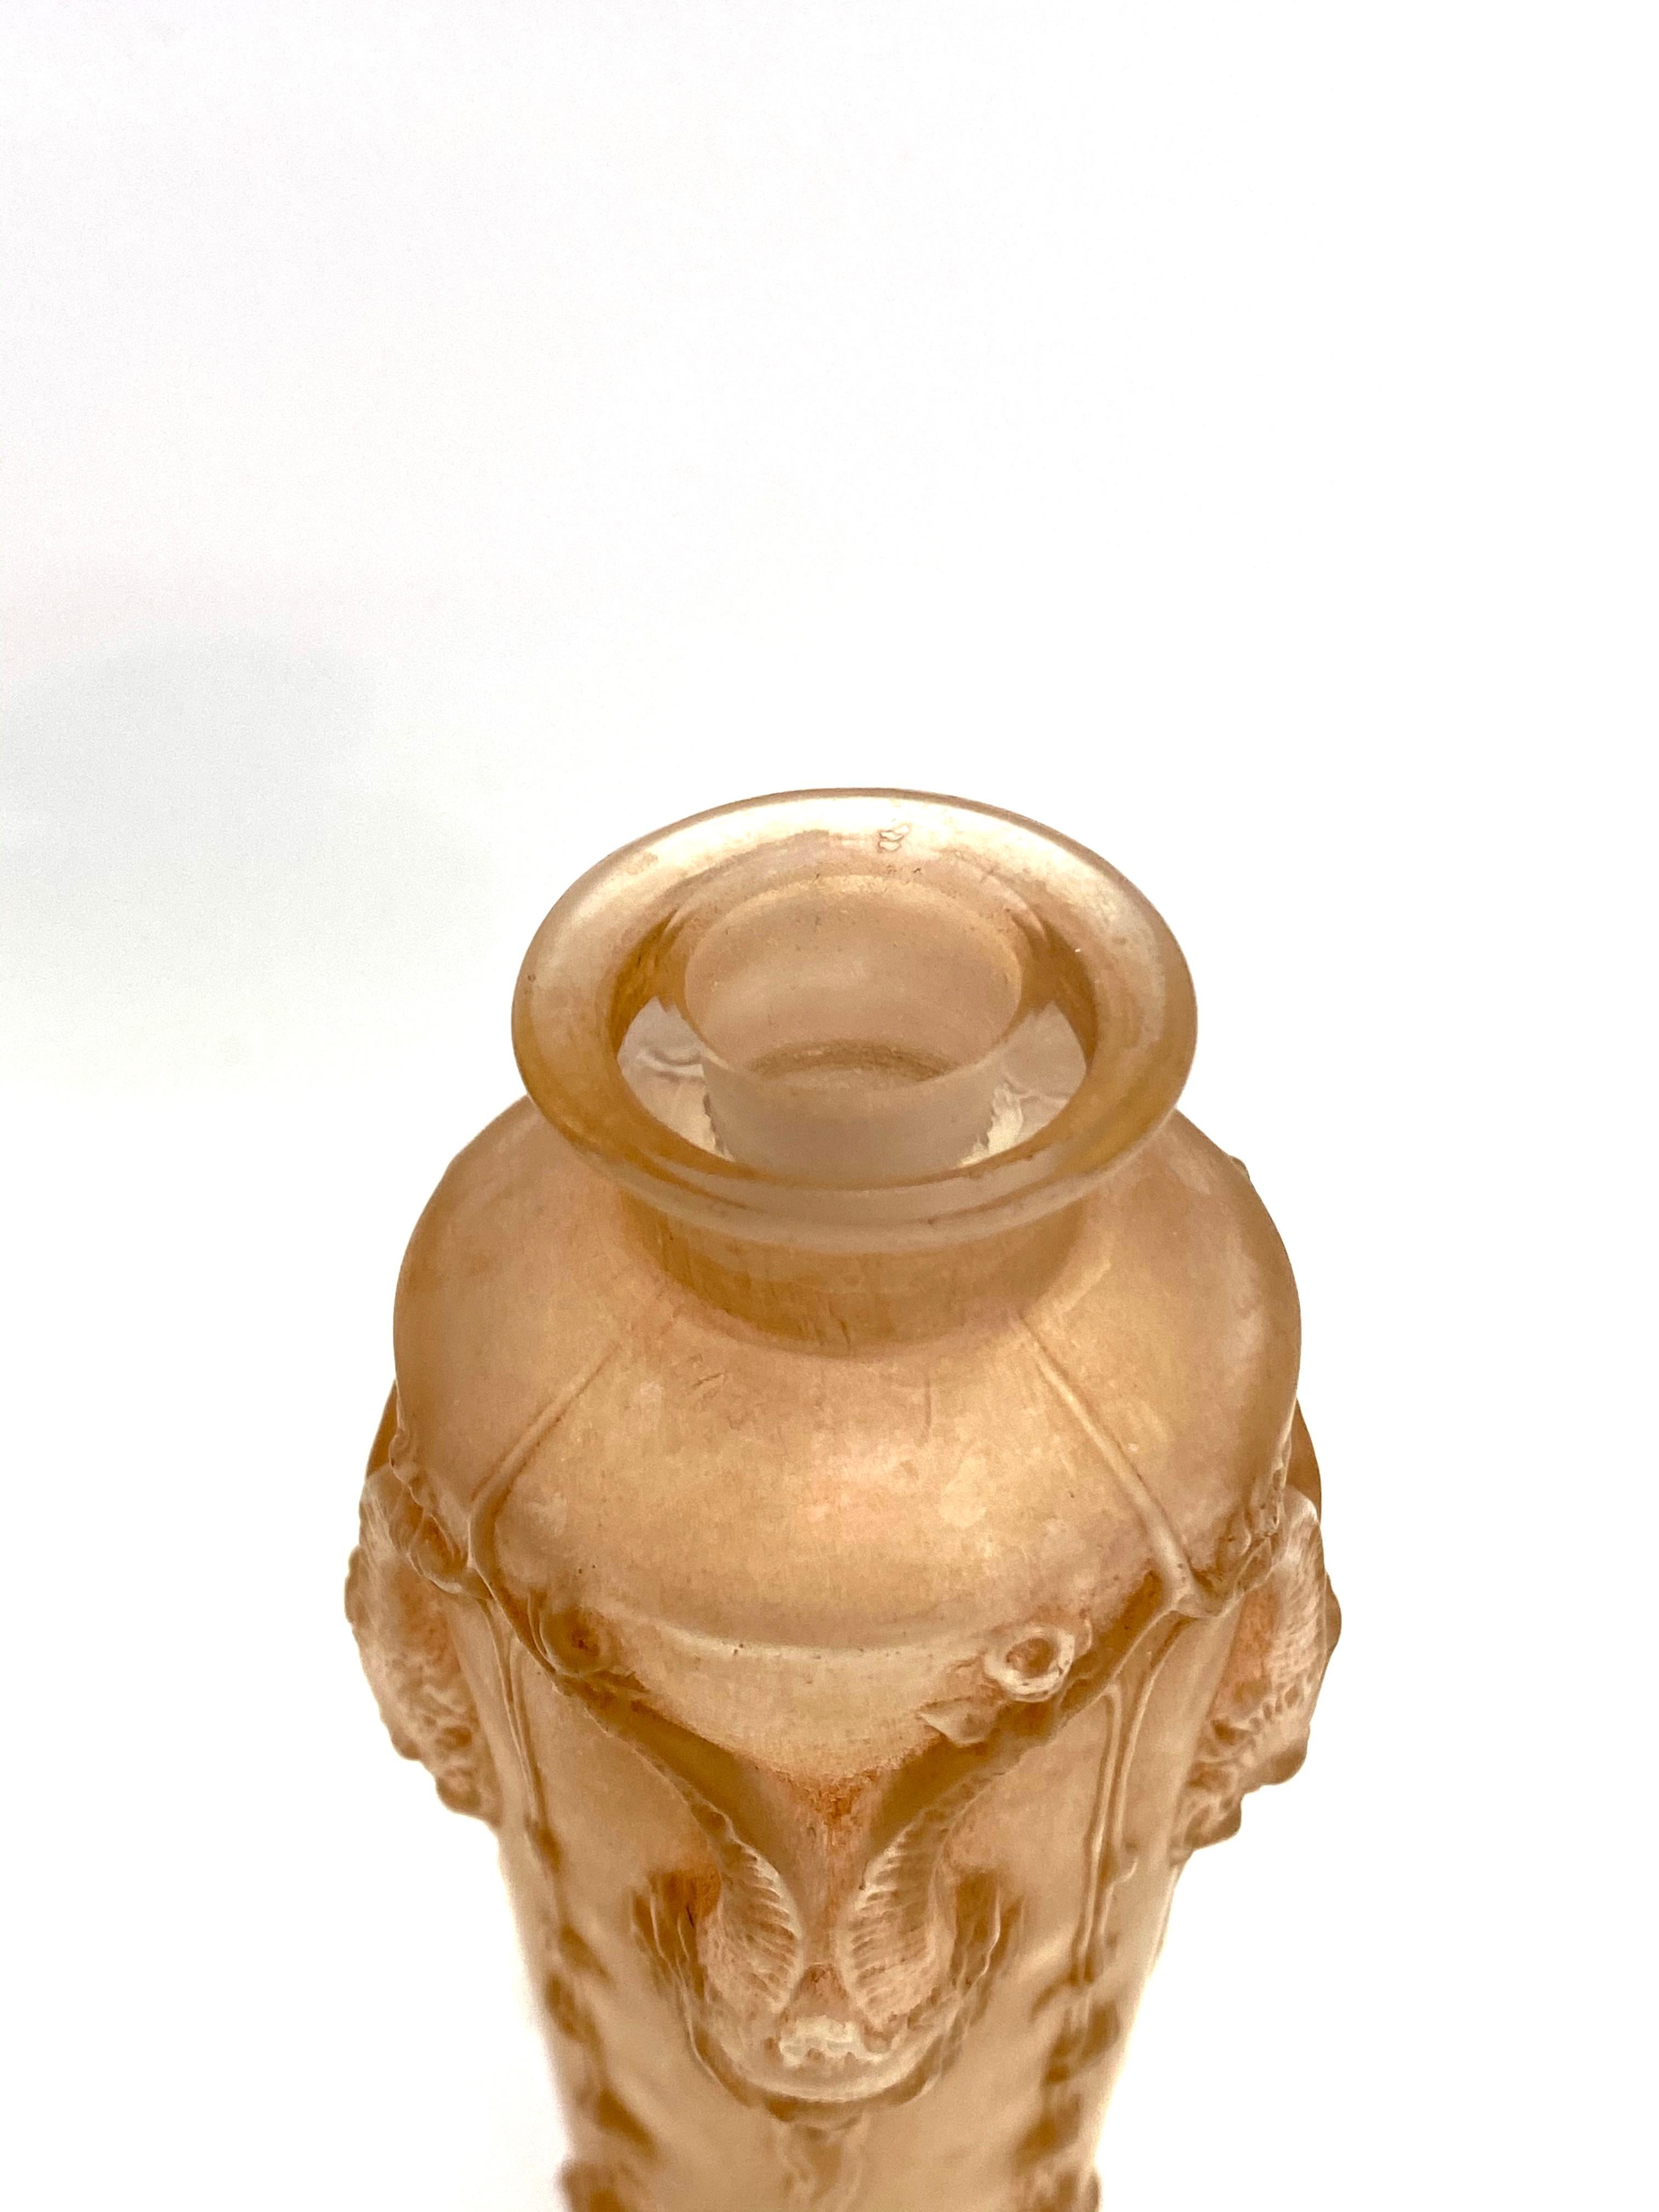 Early 20th Century 1920 René Lalique Pan Perfume Bottle Frosted Glass with Sepia Patina, Satyres